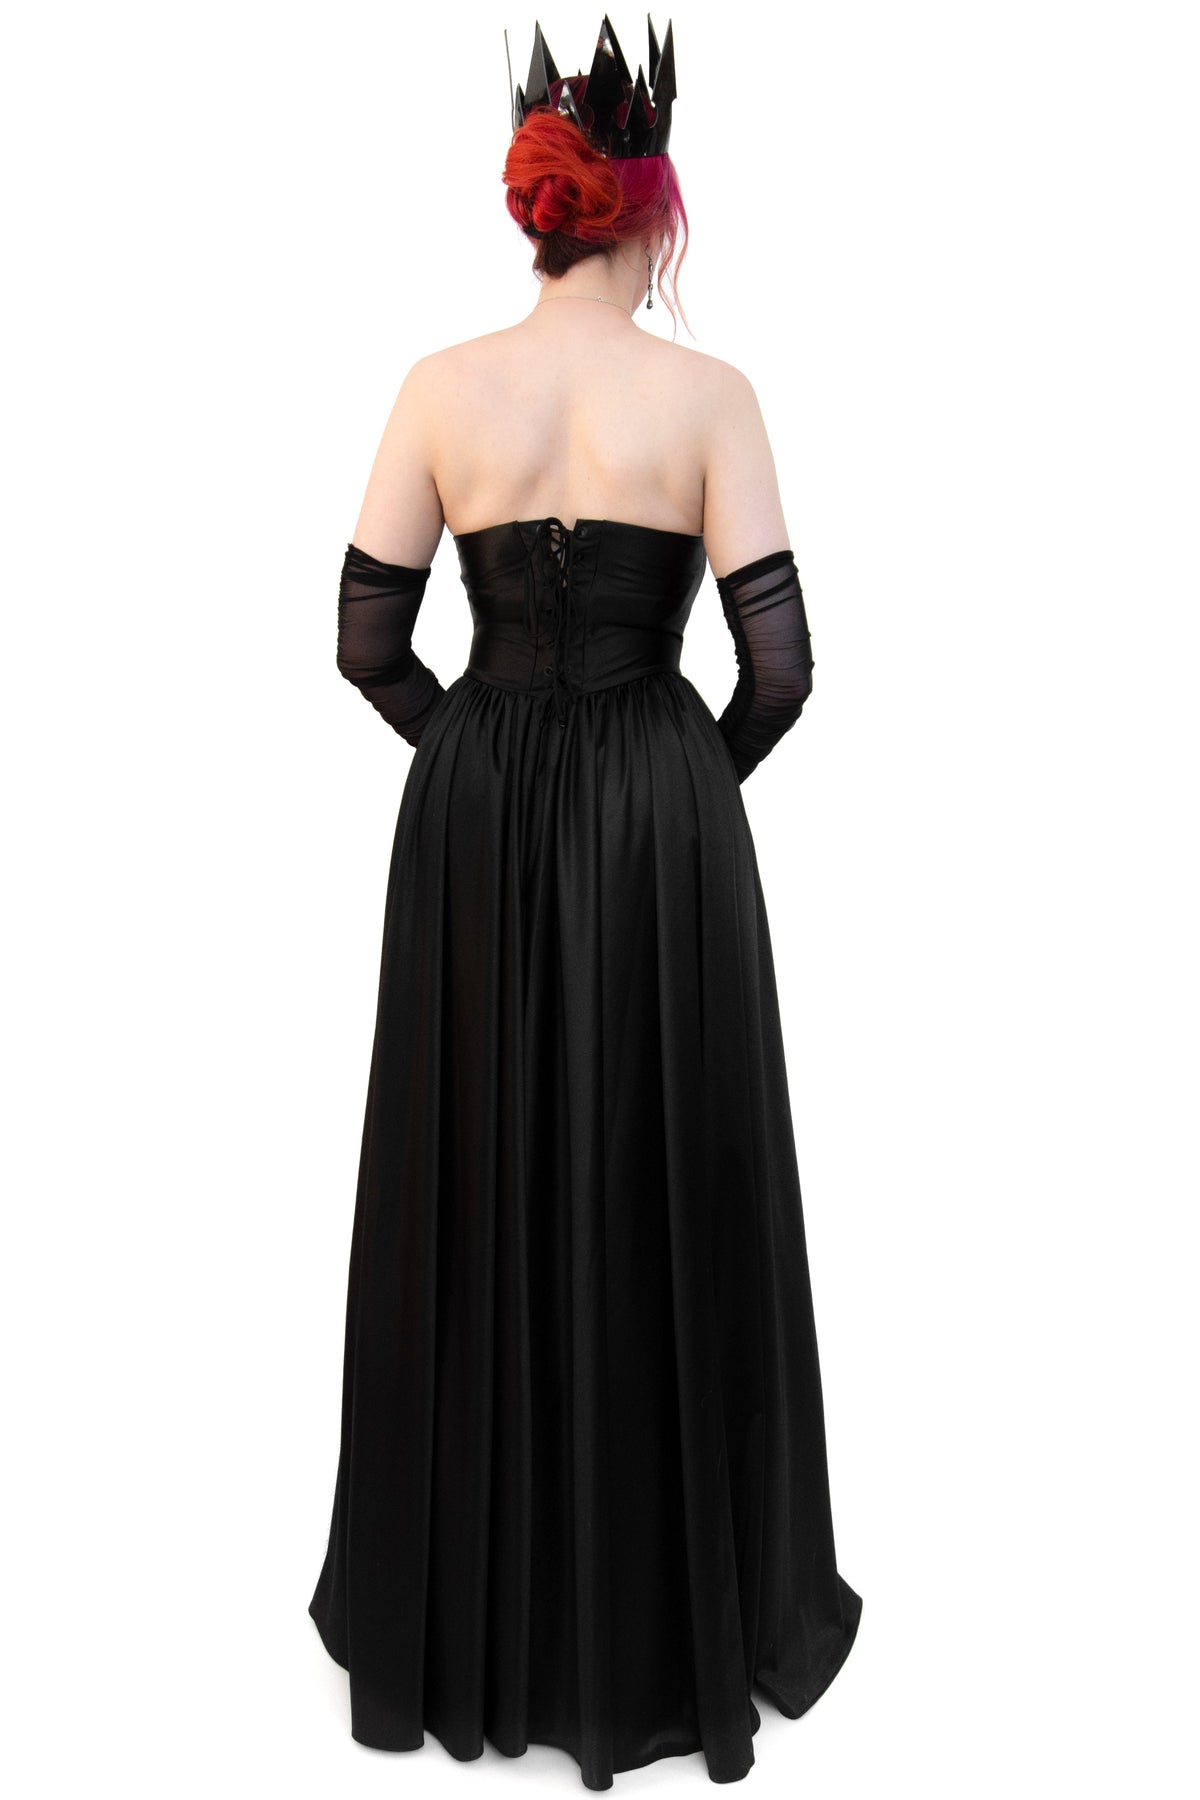 Villainess Gown - Limited Edition